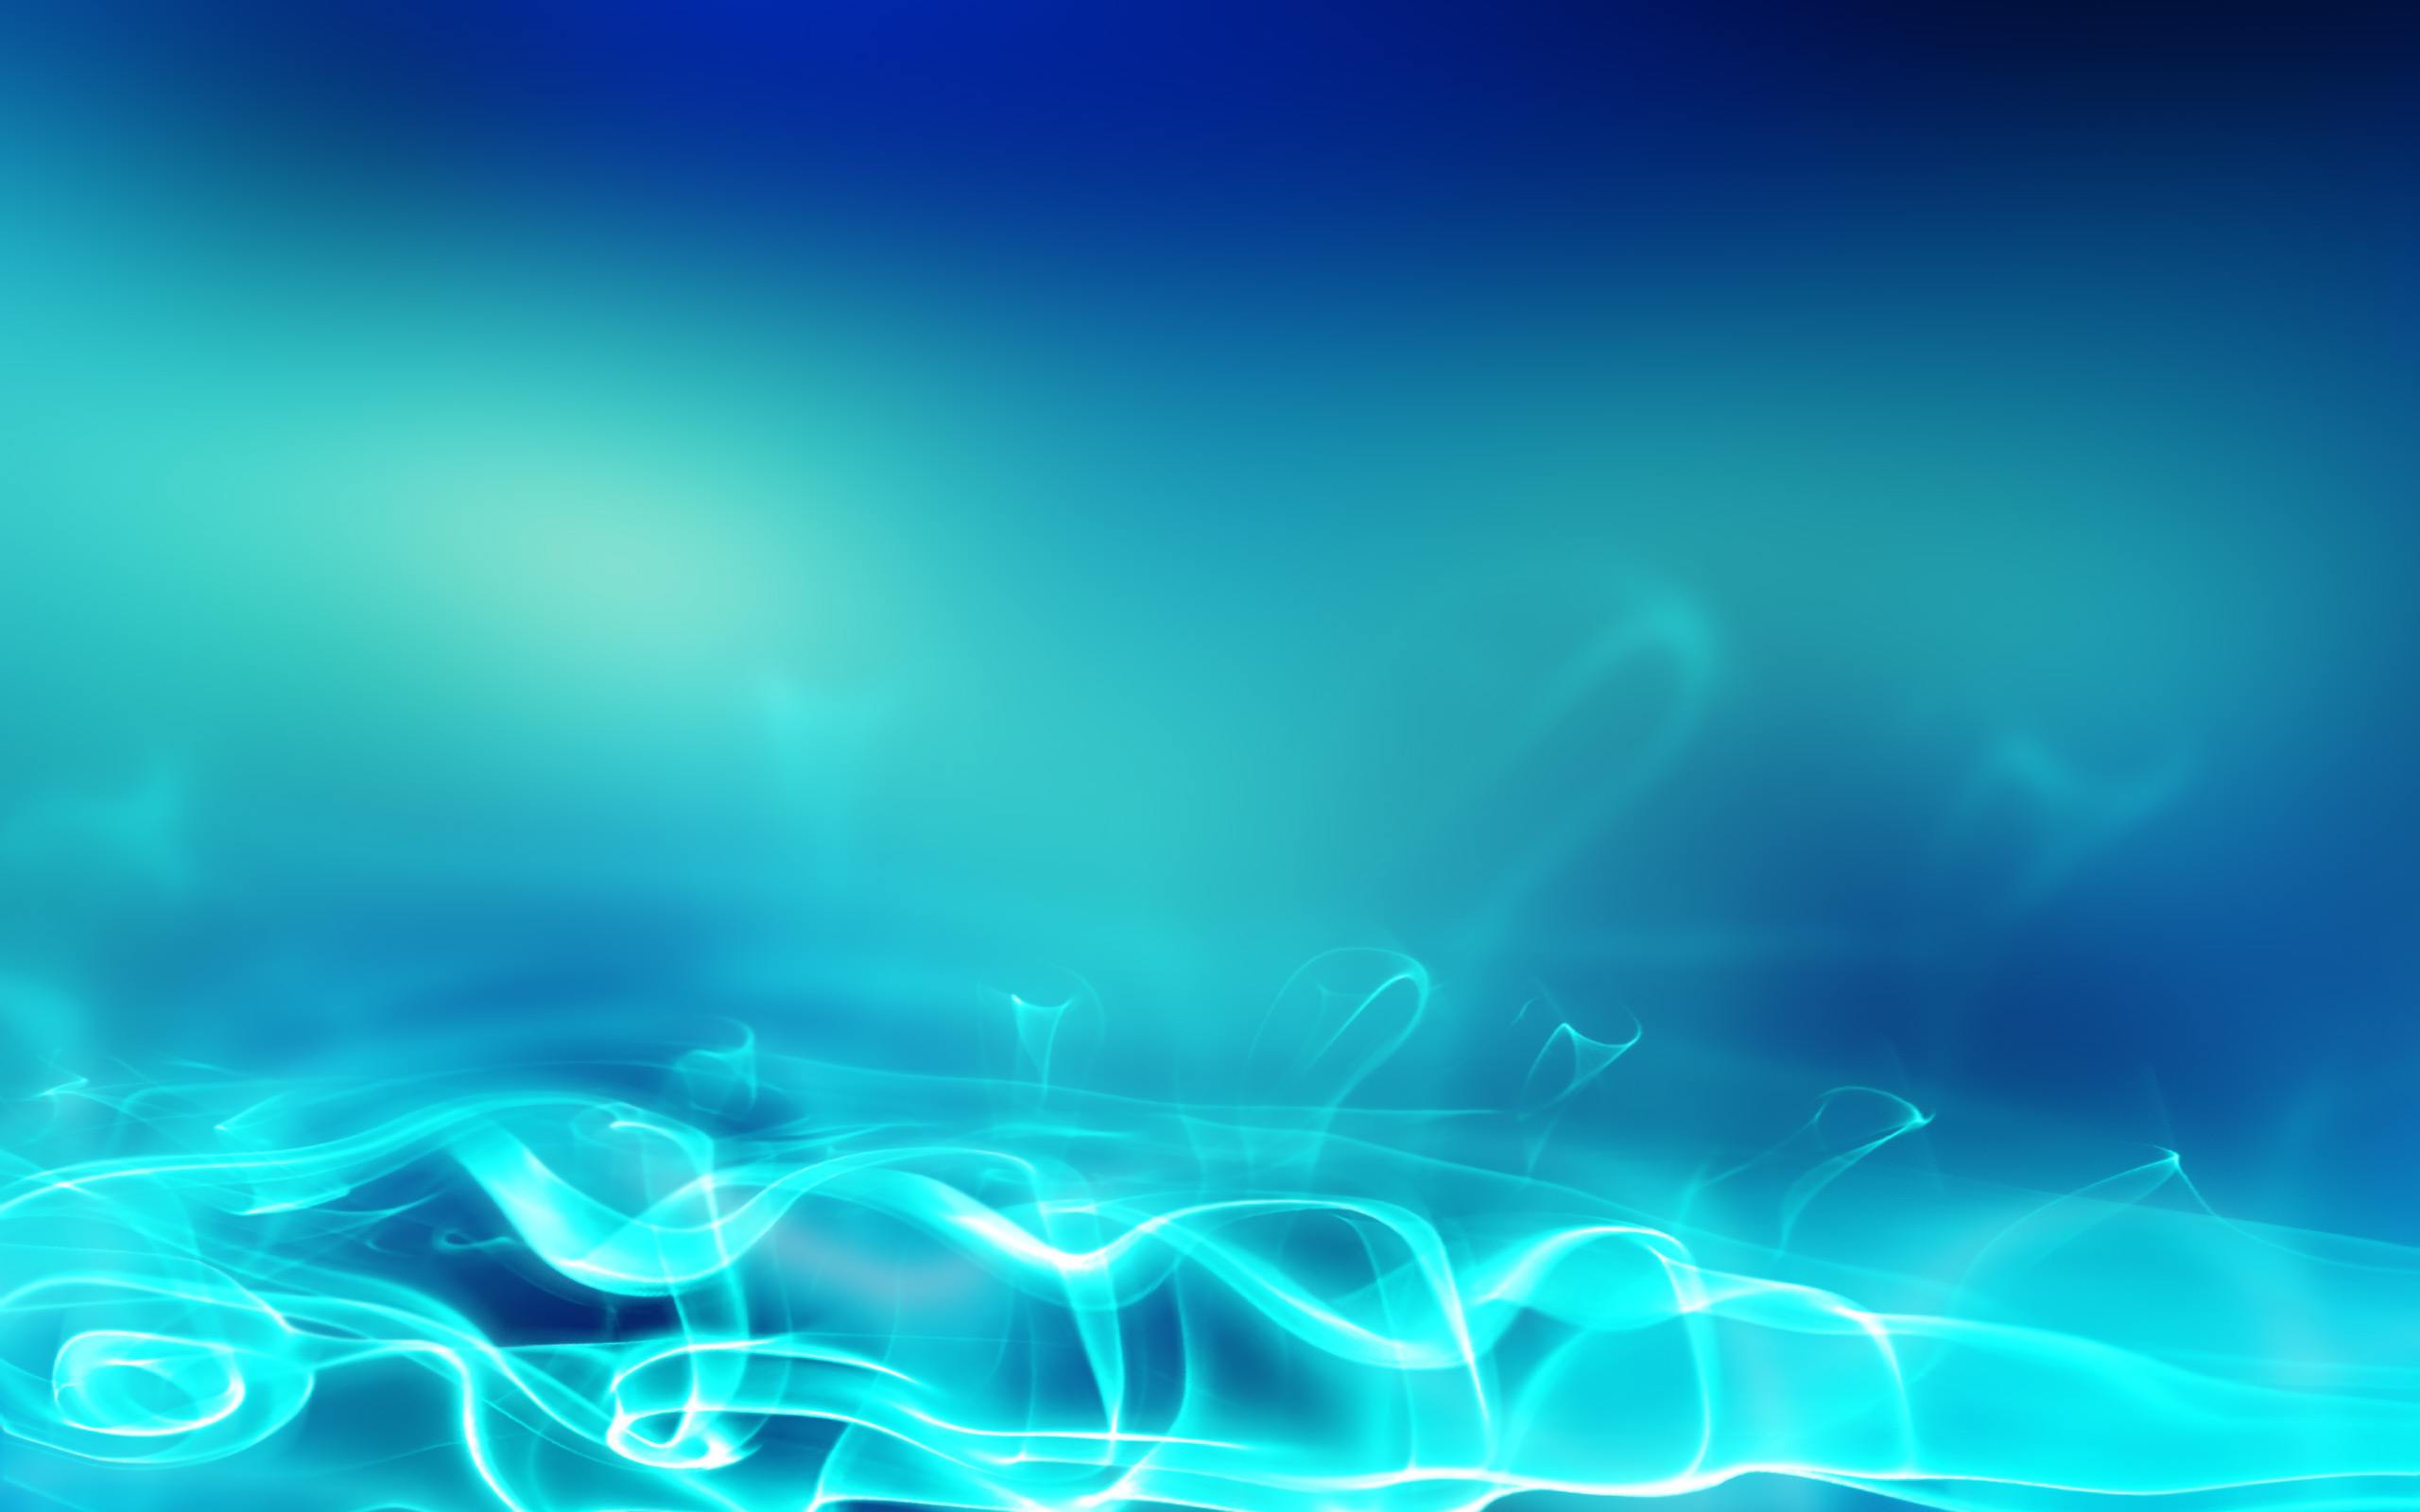 Free Aurora Smoke Backgrounds For PowerPoint